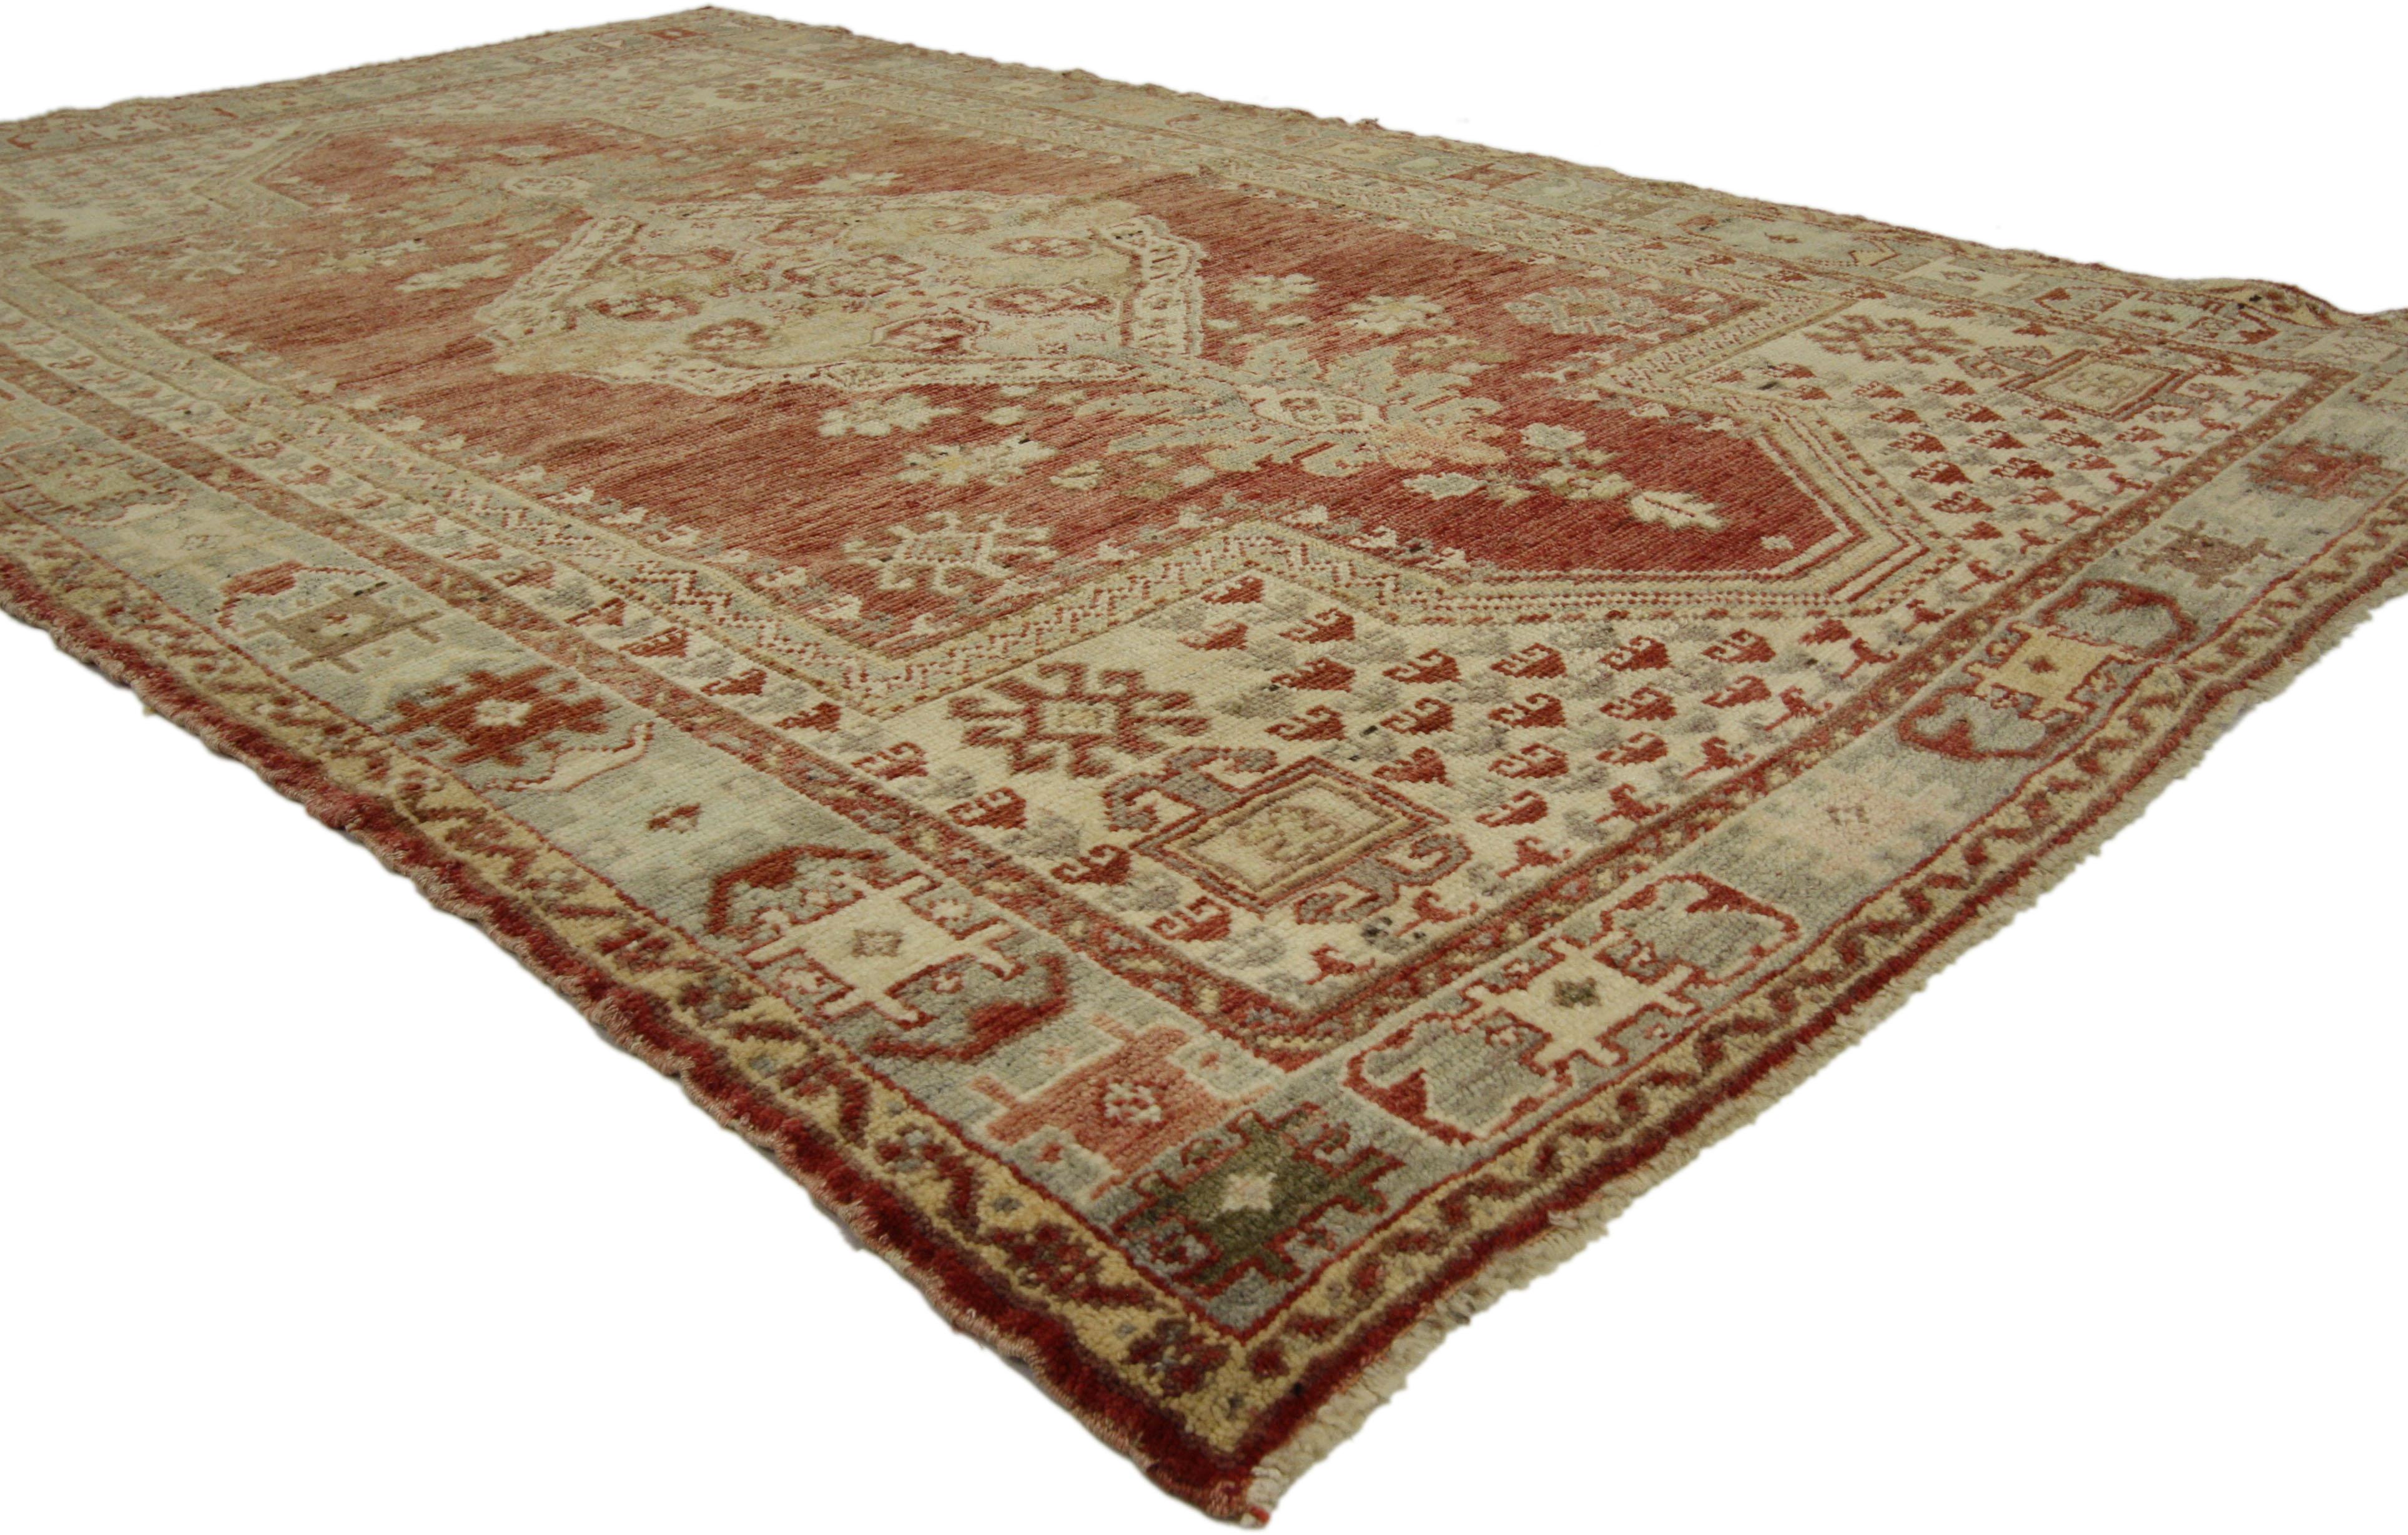 73890, vintage Turkish Oushak rug with rustic style, Anatolian Turkish Prayer rug. This hand knotted wool vintage Turkish Oushak rug features a large-scale boteh filled central medallion anchored with blooming palmettes at either end and dotted with